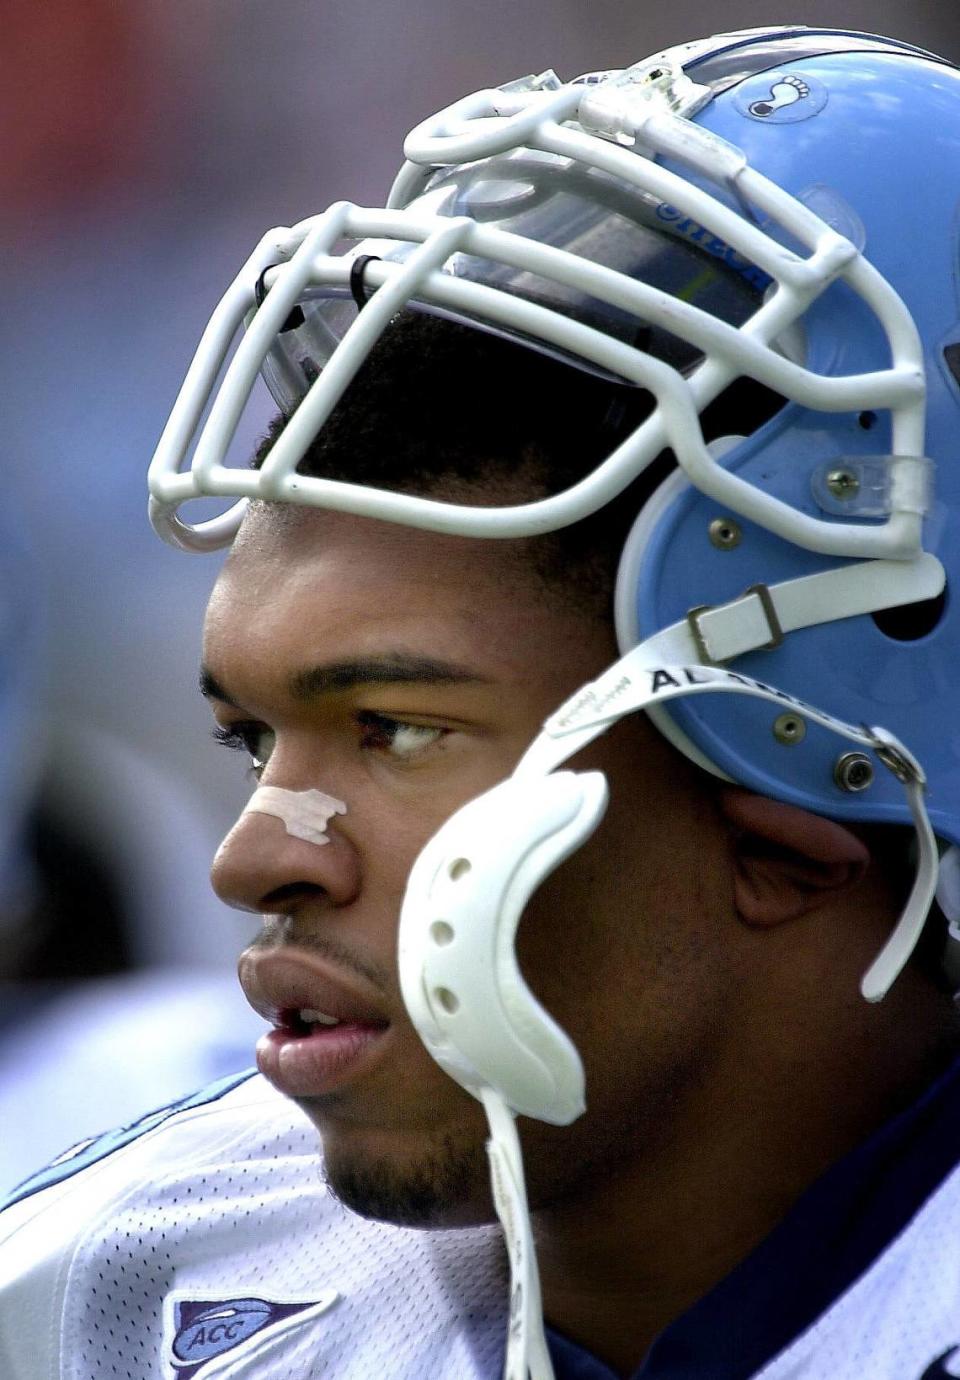 UNC defensive end Julius Peppers on the sidelines during a game in 2000. Scott Sharpe/ssharpe@newsobserver.com